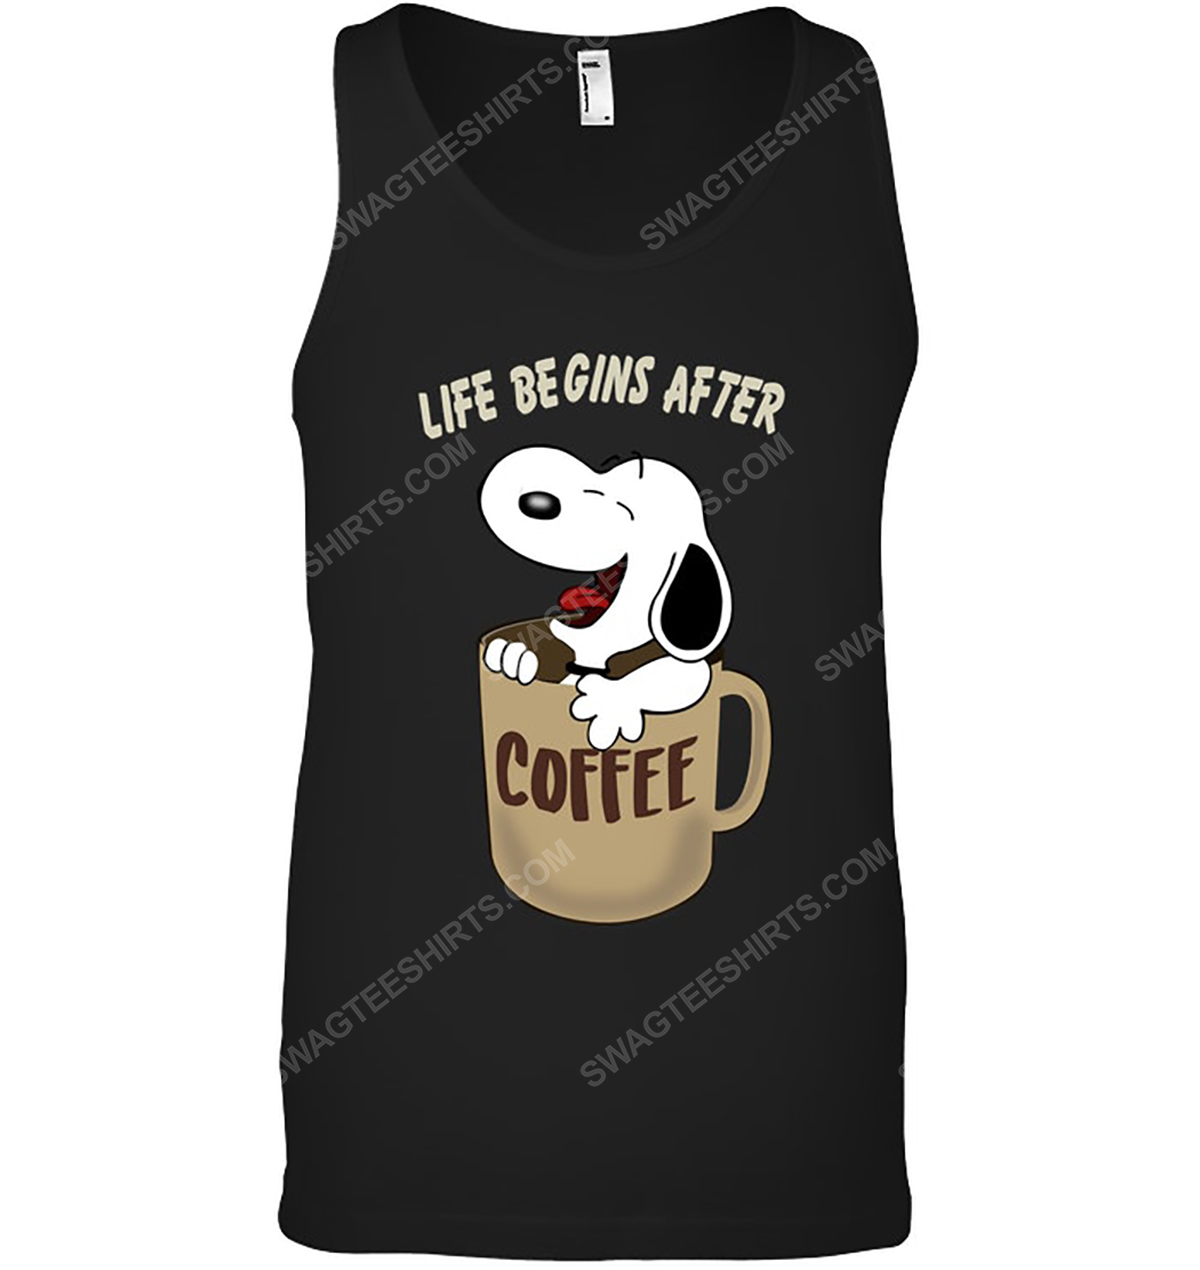 The peanuts snoopy life begins after coffee tank top 1